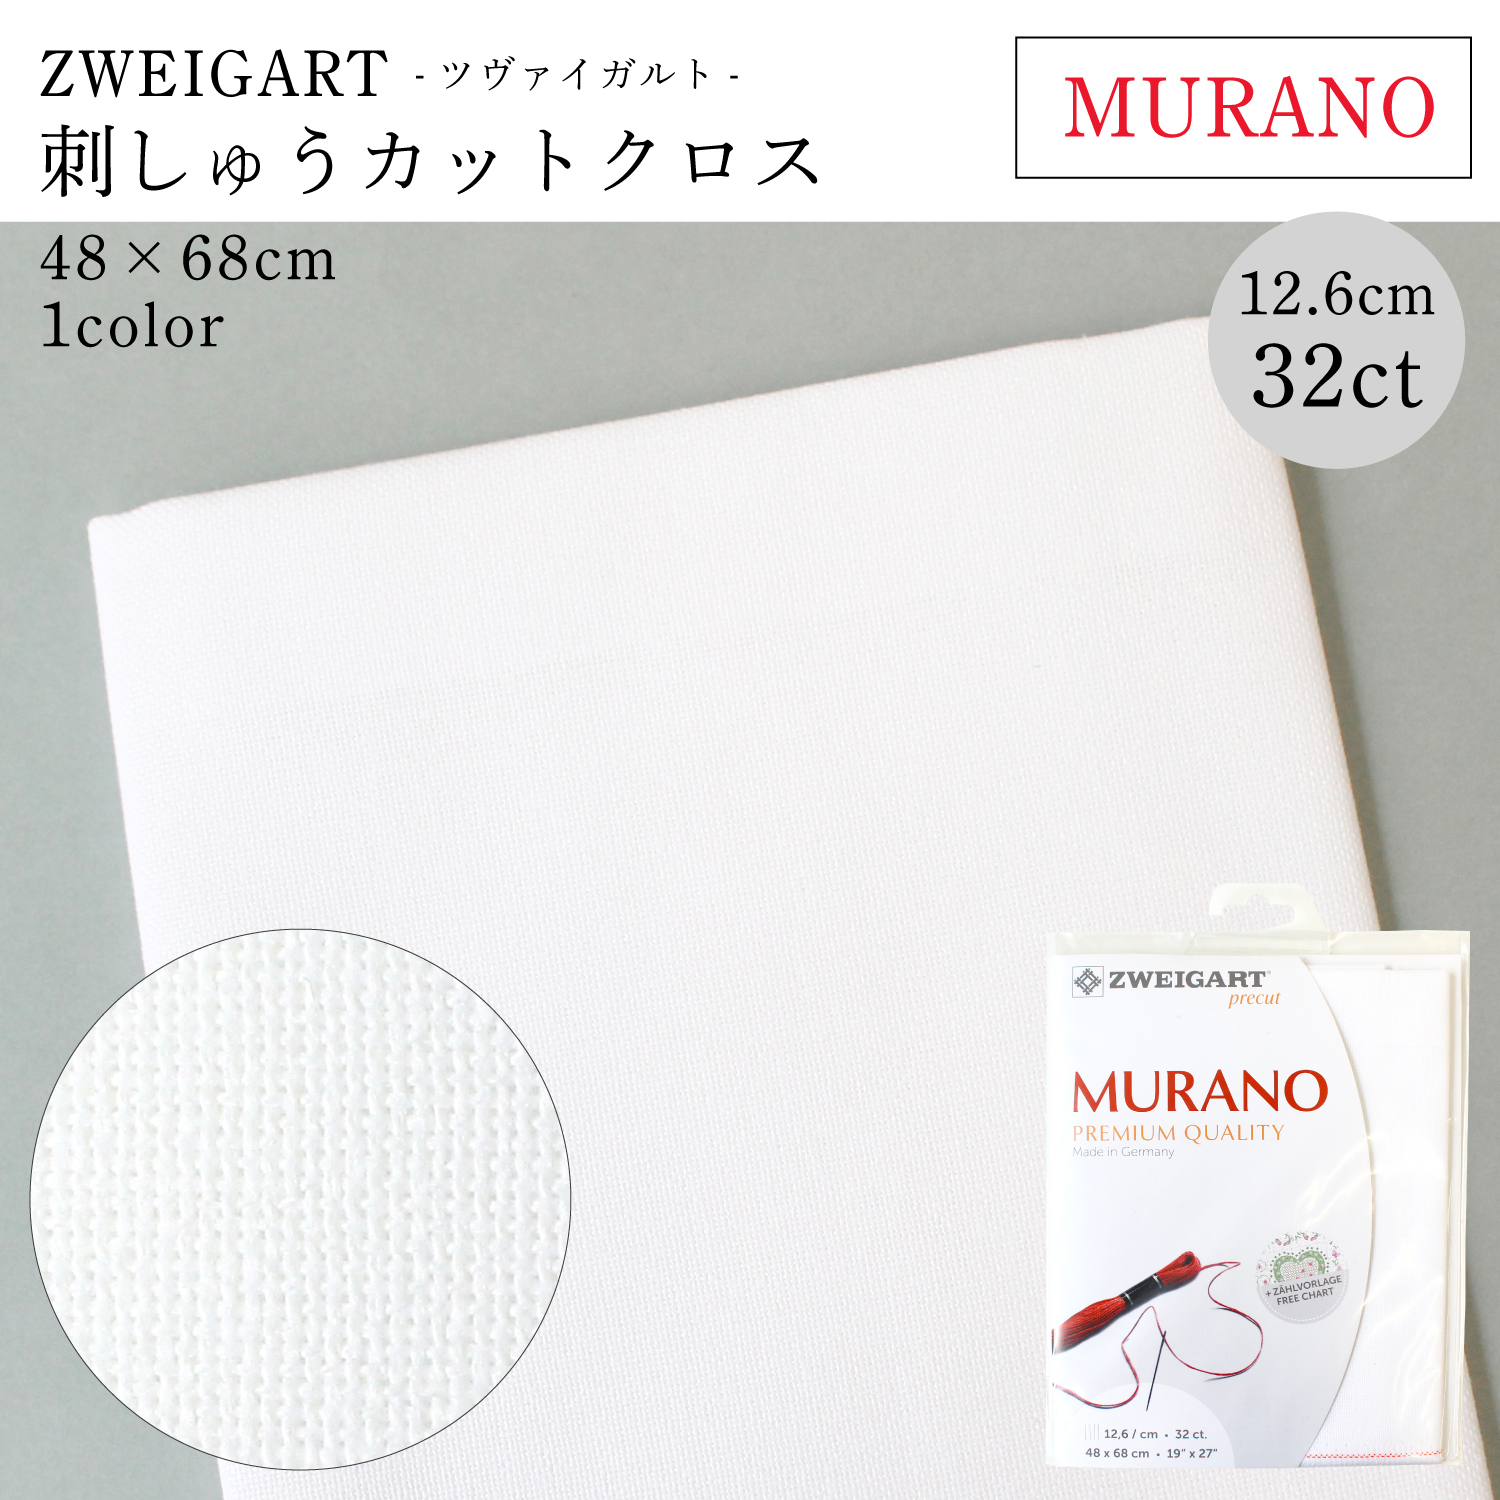 ZW3984P ZWEIGART Embroidery Cloth 32CT MURANO 48x68cm (bag)